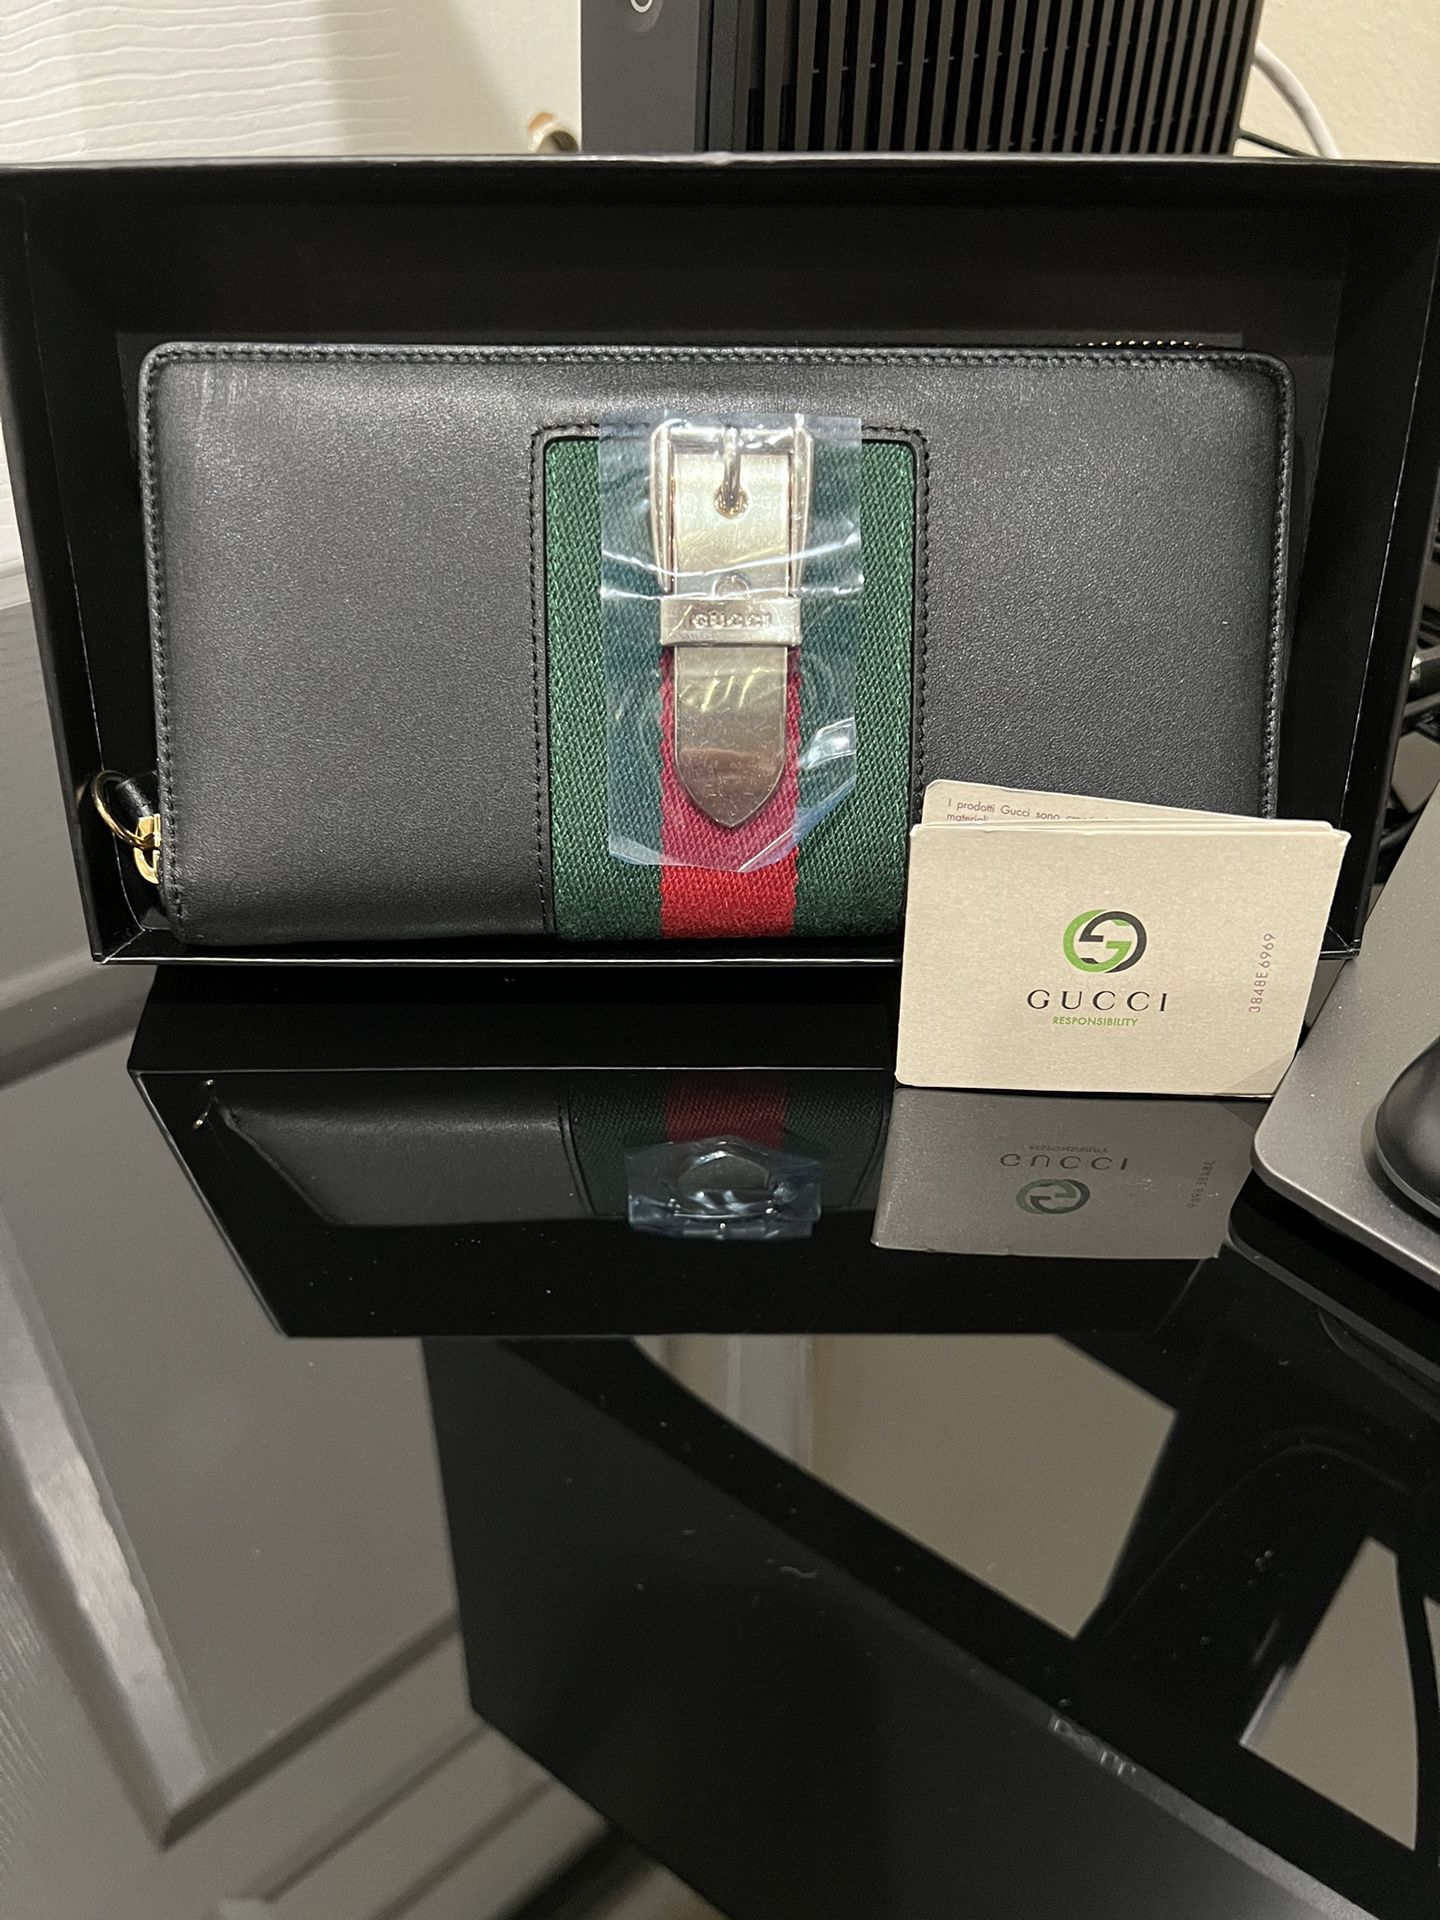 Brand New Authentic Ladies Gucci Wallet $150 